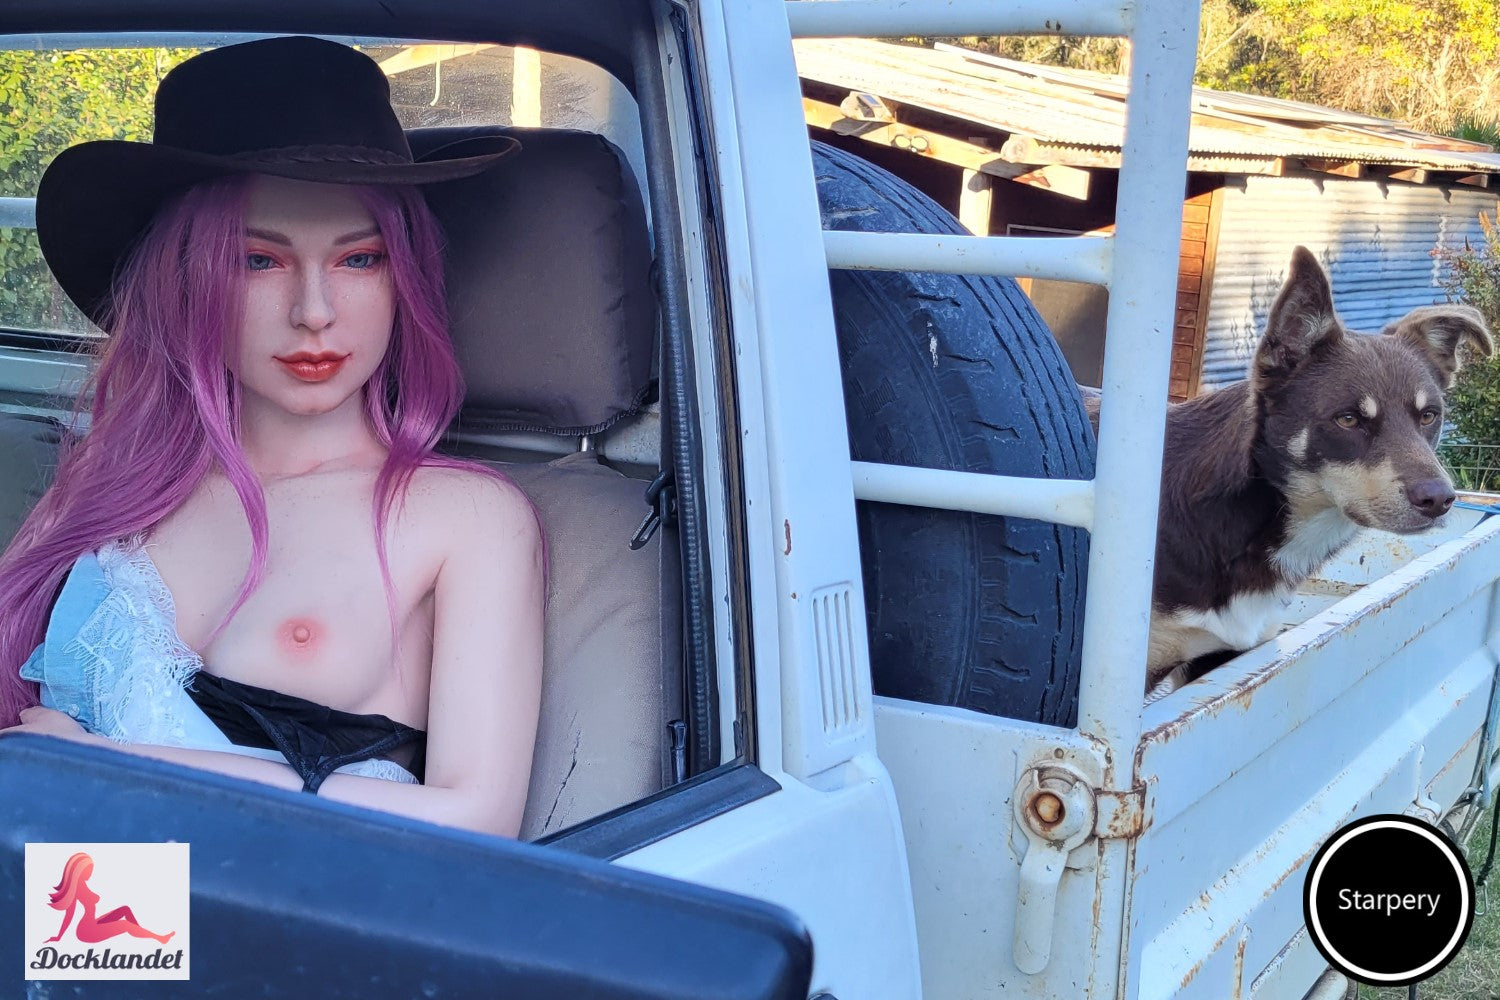 Starpery Queen 171cm A-cup sex doll. Pink hair real doll with small breast and blue eyes. Sitting in a car with a cowboy hat and a dog. Docklandet store in Sweden. Free delivery to whole EU.